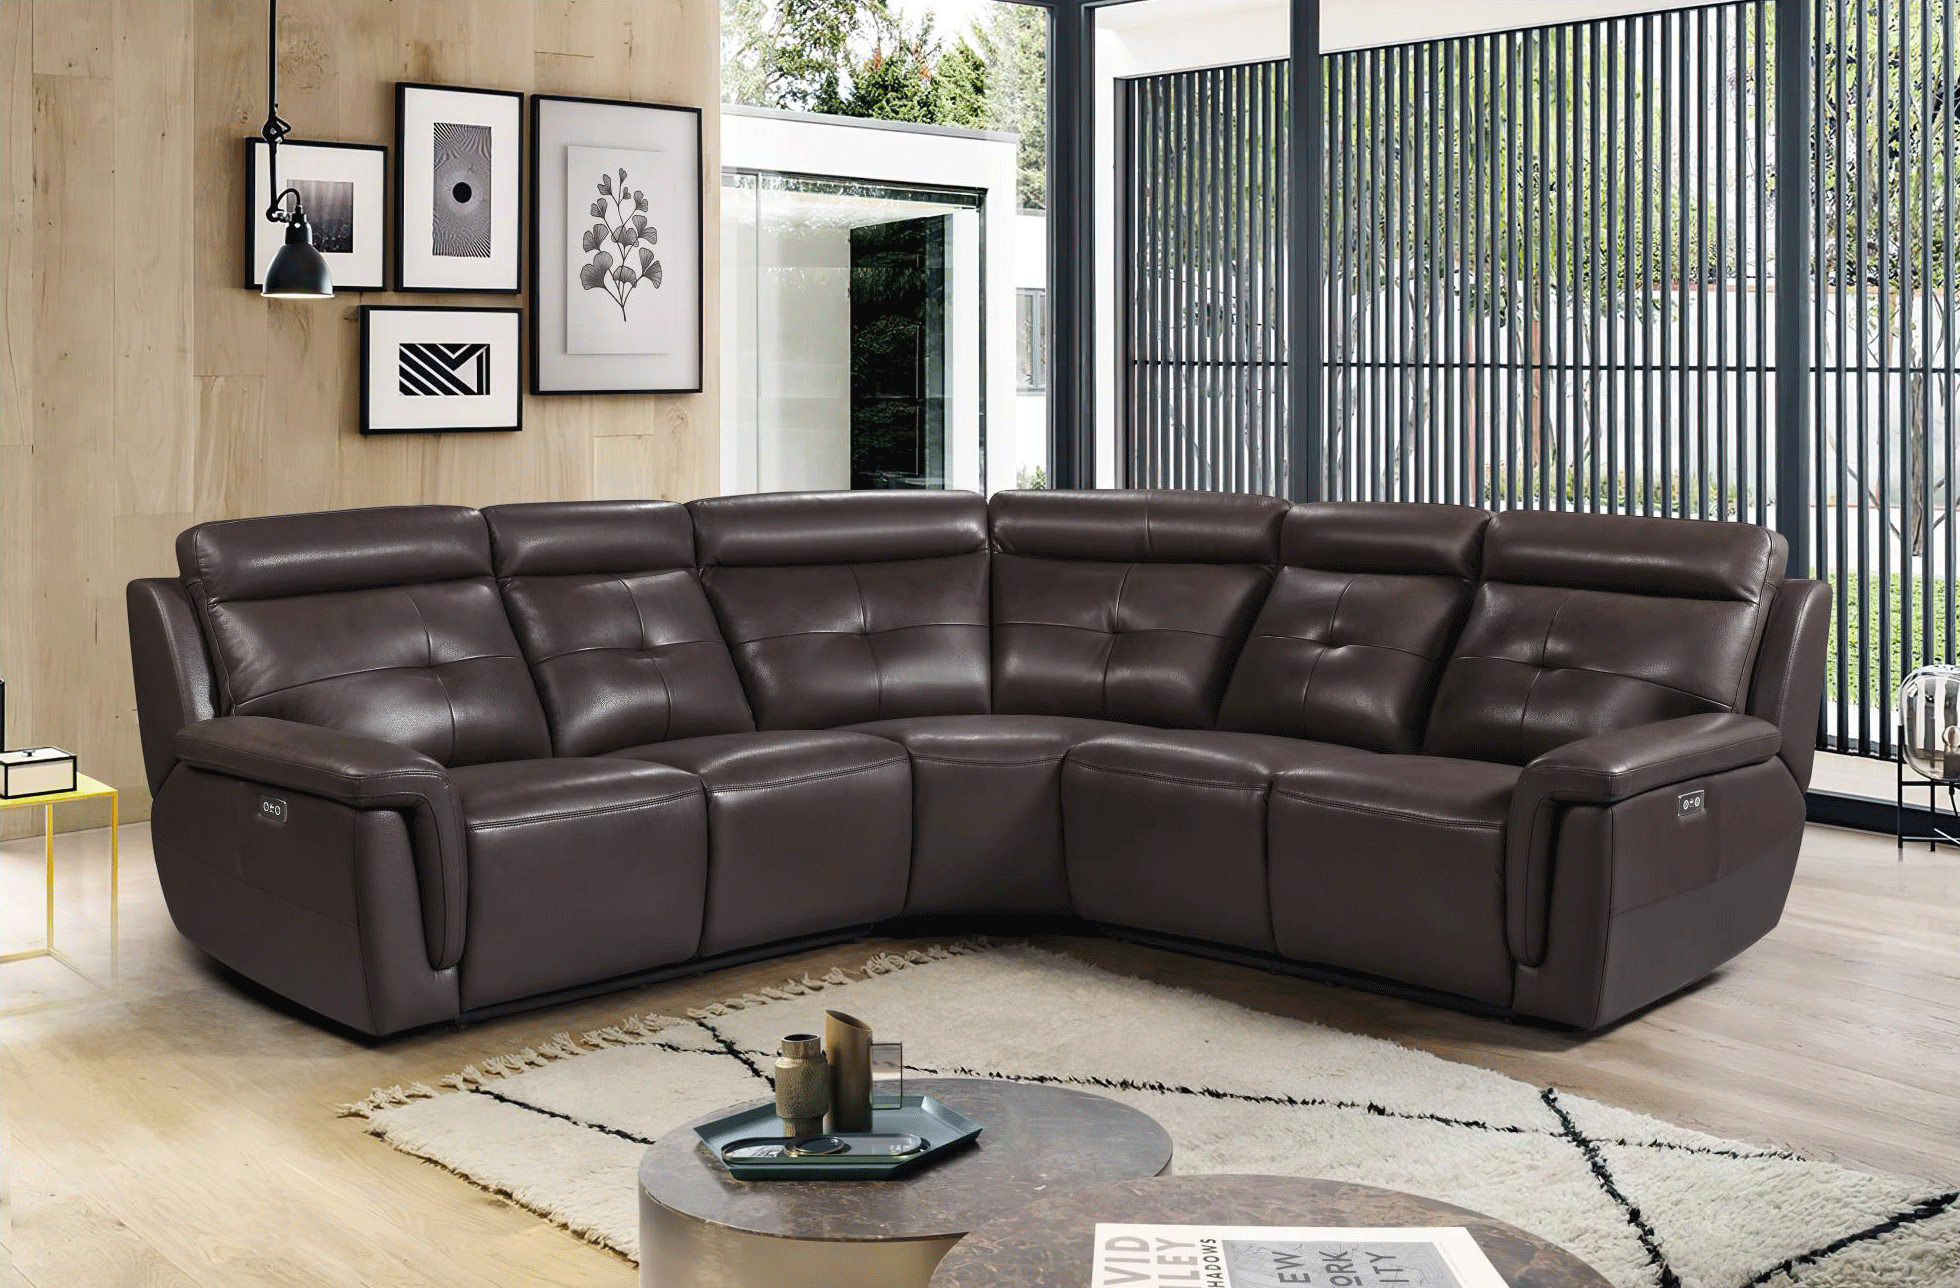 Brands WCH Modern Living Special Order 2937 Sectional w/ electric recliners